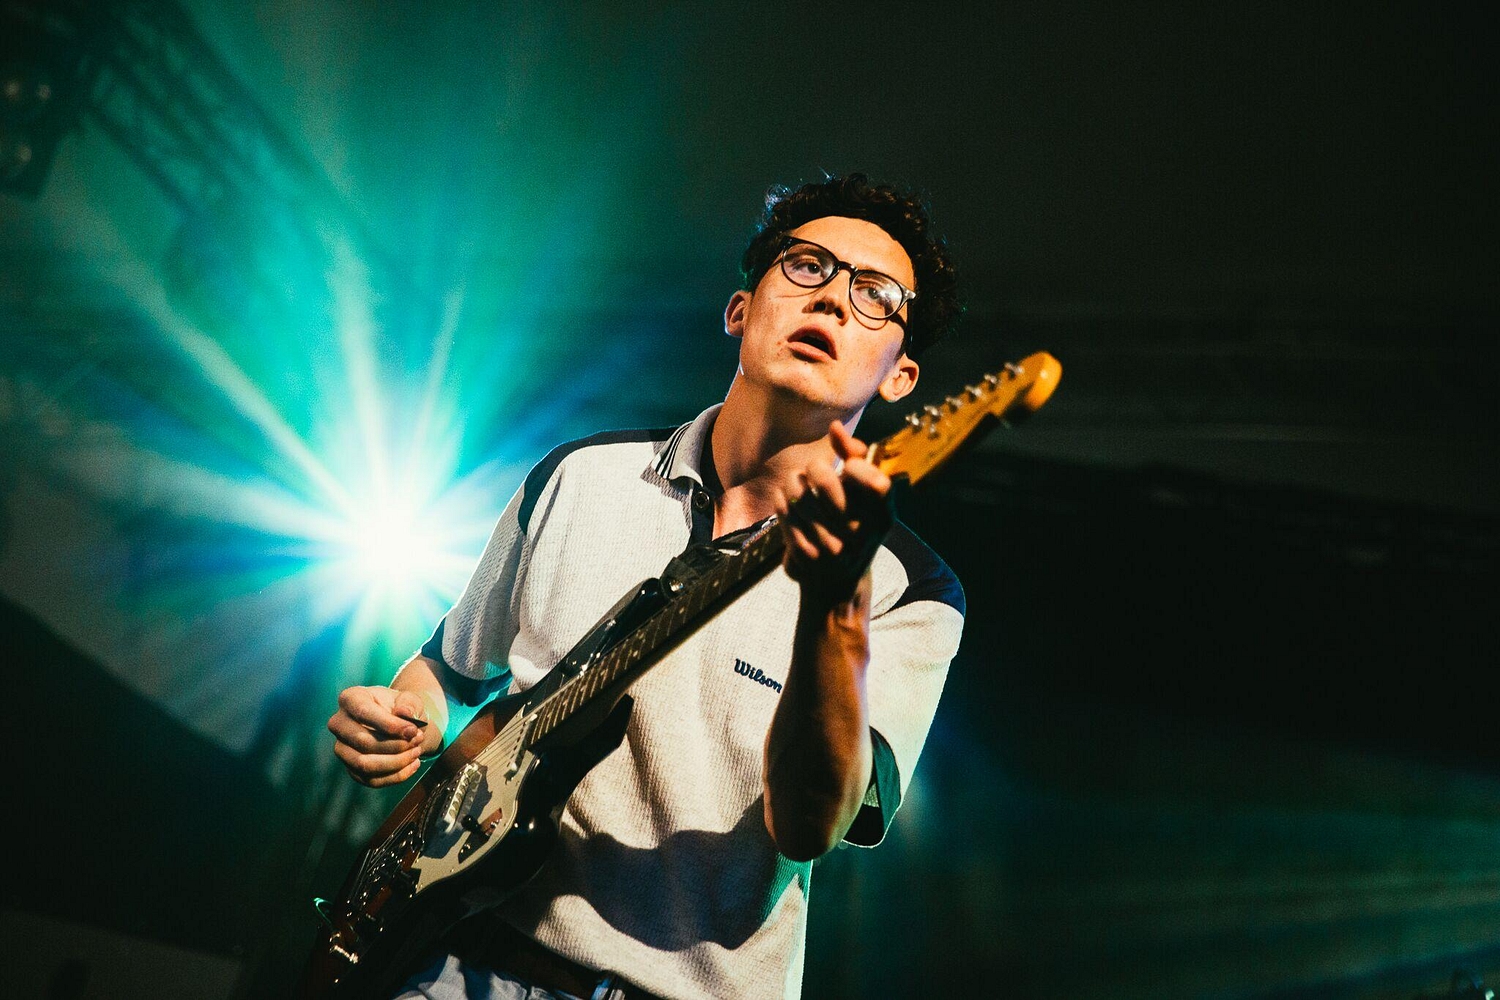 The Magic Gang are supporting Wolf Alice on tour in Europe!